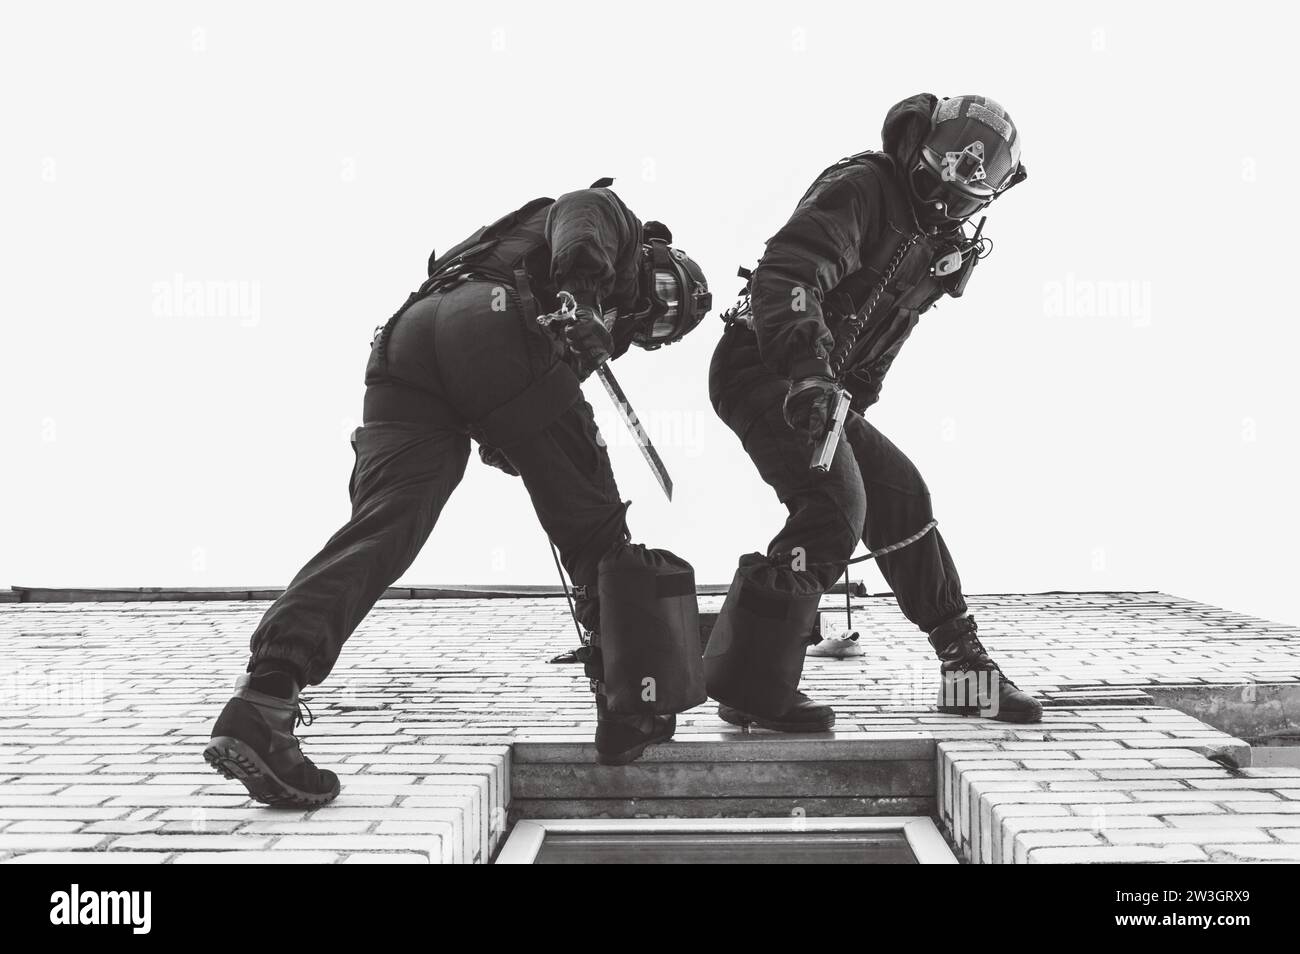 Two commandos train at the base. Climbers. SWAT, police, counterterrorism concept. Mixed media Stock Photo